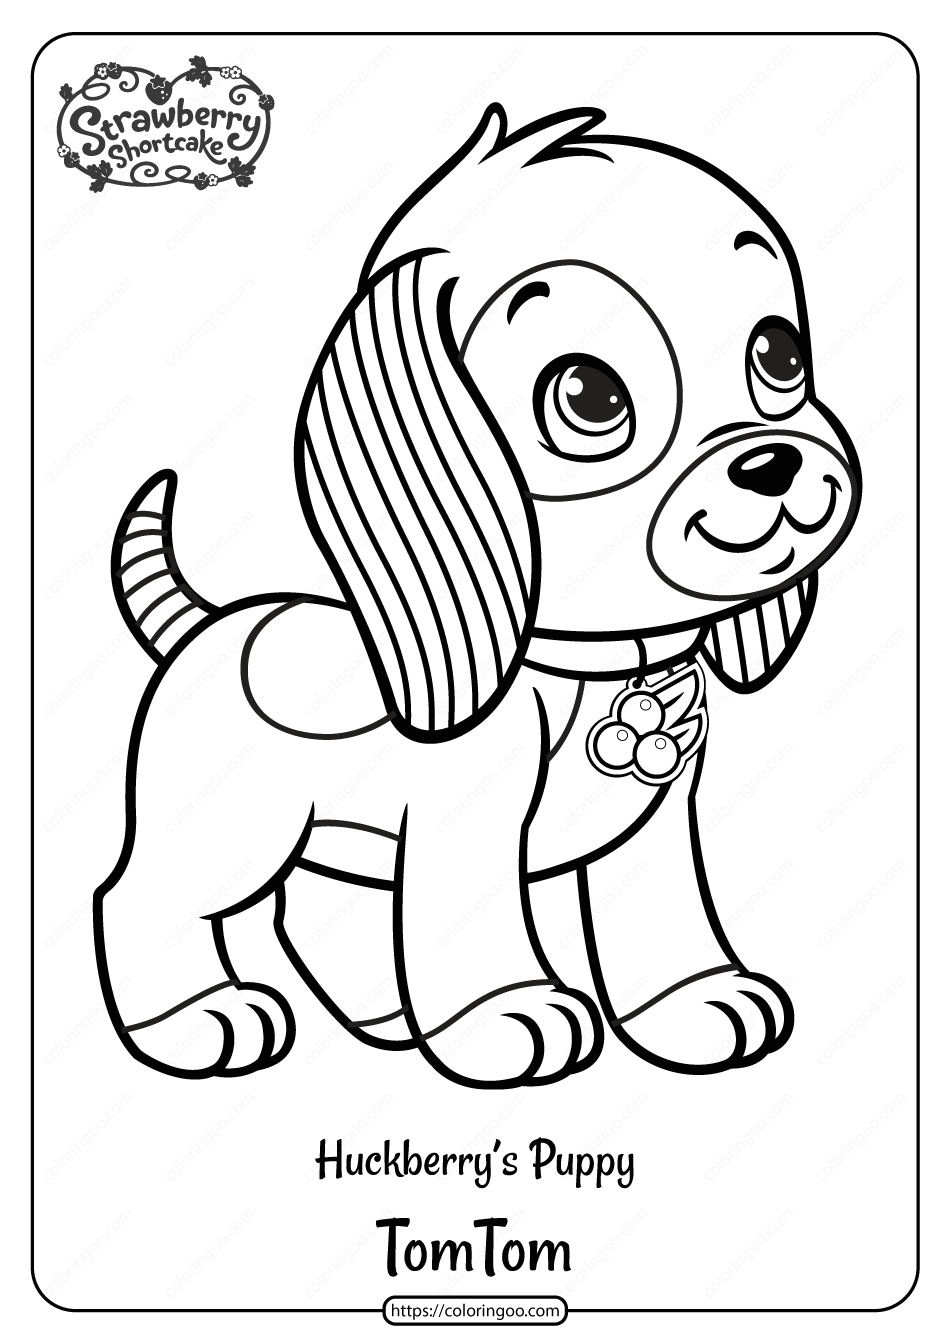 Printable Huckleberry’s Puppy Tom Tom Coloring Page